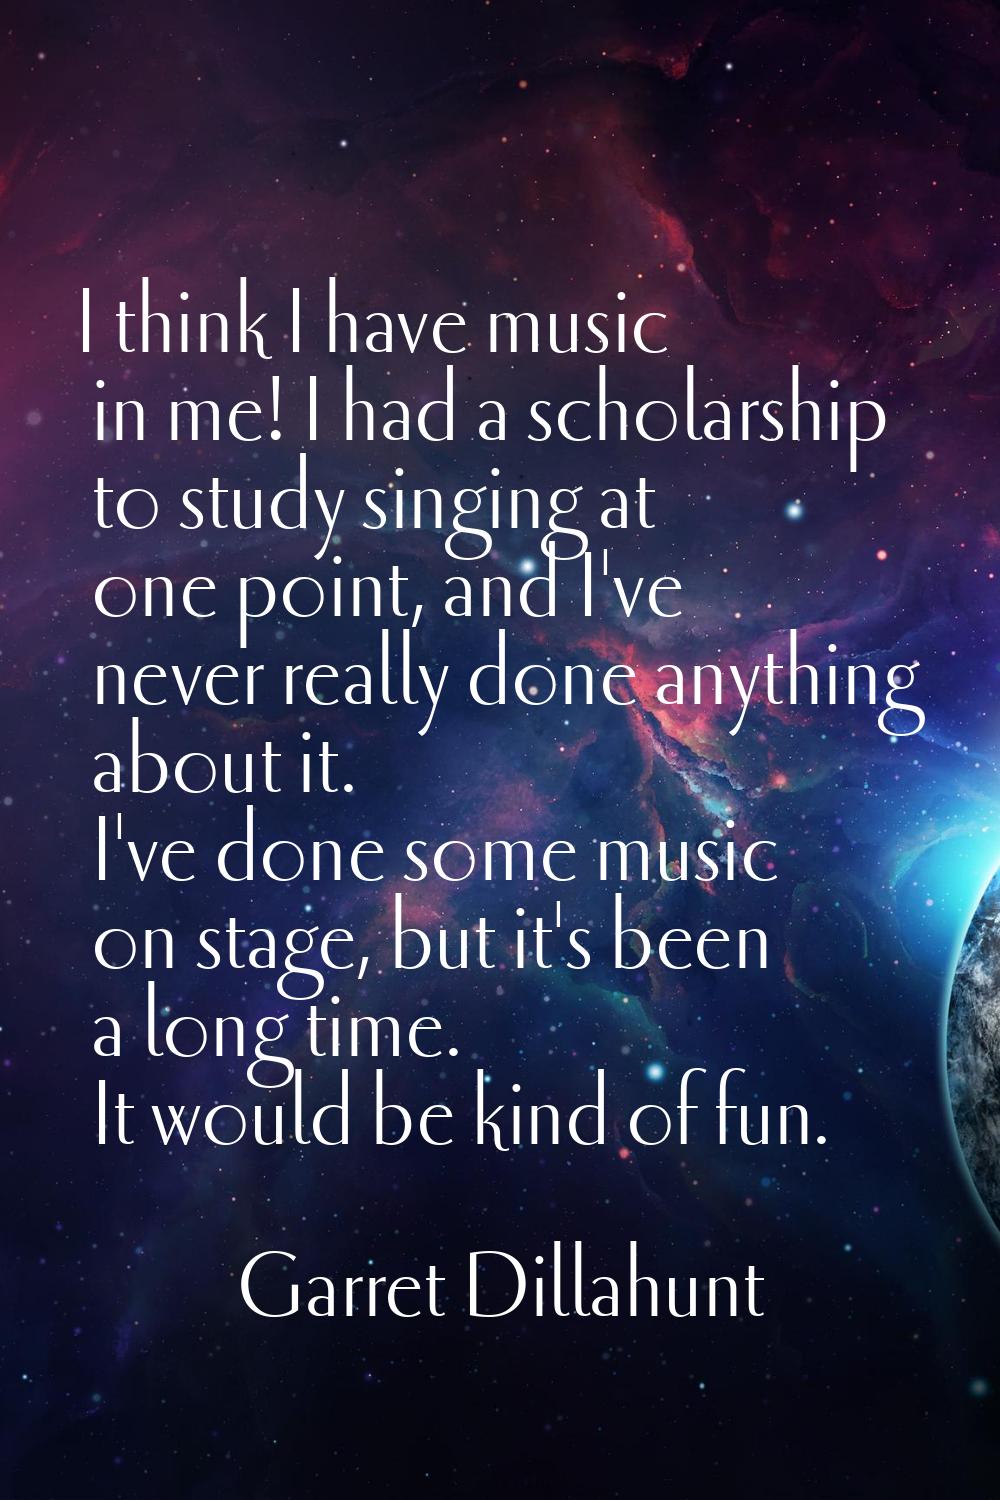 I think I have music in me! I had a scholarship to study singing at one point, and I've never reall